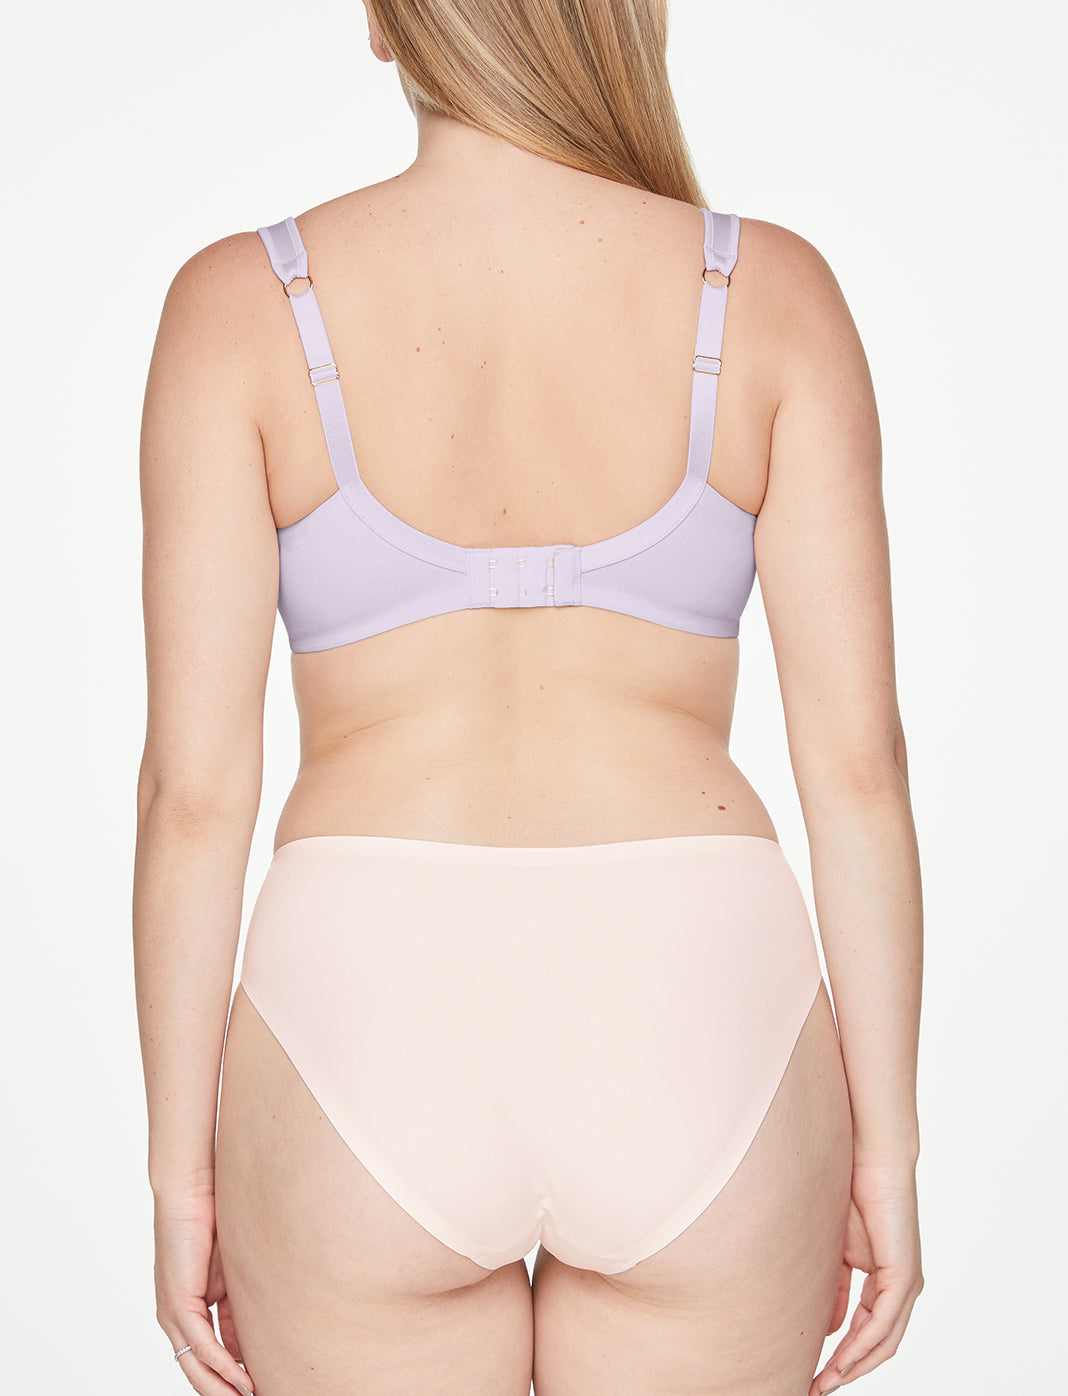 ThirdLove 24/7 Lace Balconette Bra, ThirdLove Will Help You Find Your  Perfect Fitting Bra — It's Probably 1 of These 11 Styles